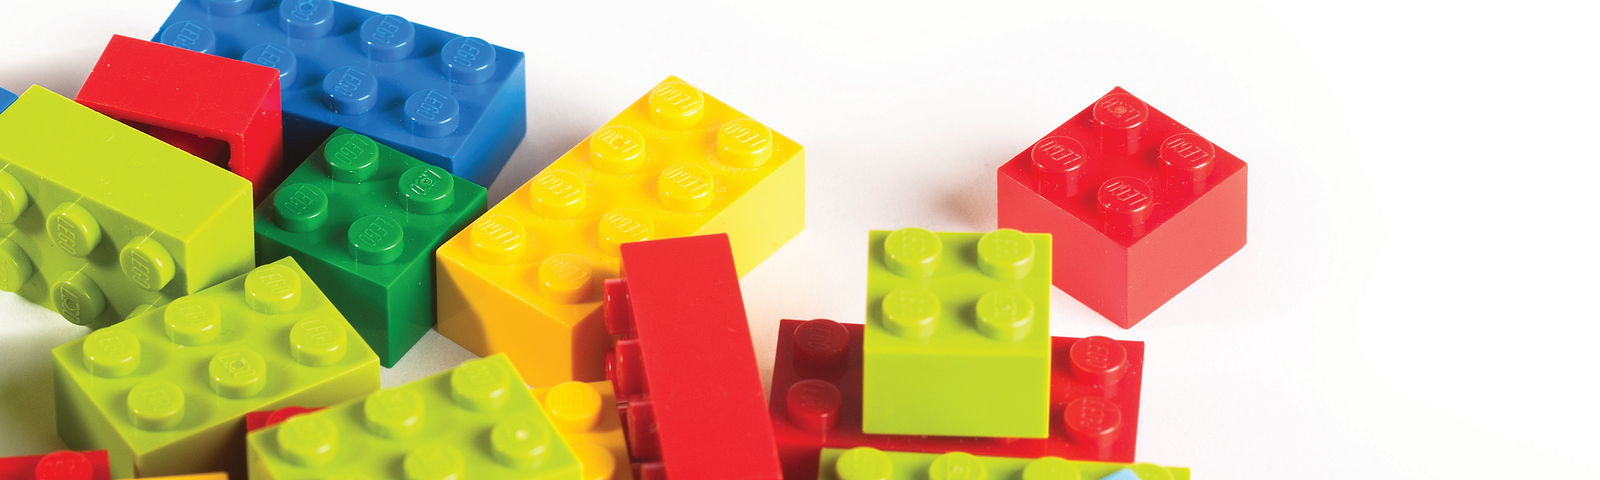 Colorful lego blocks randomly spaced at the bottom of the picture. Copy reads: 5 Surprising Ways to Simplify